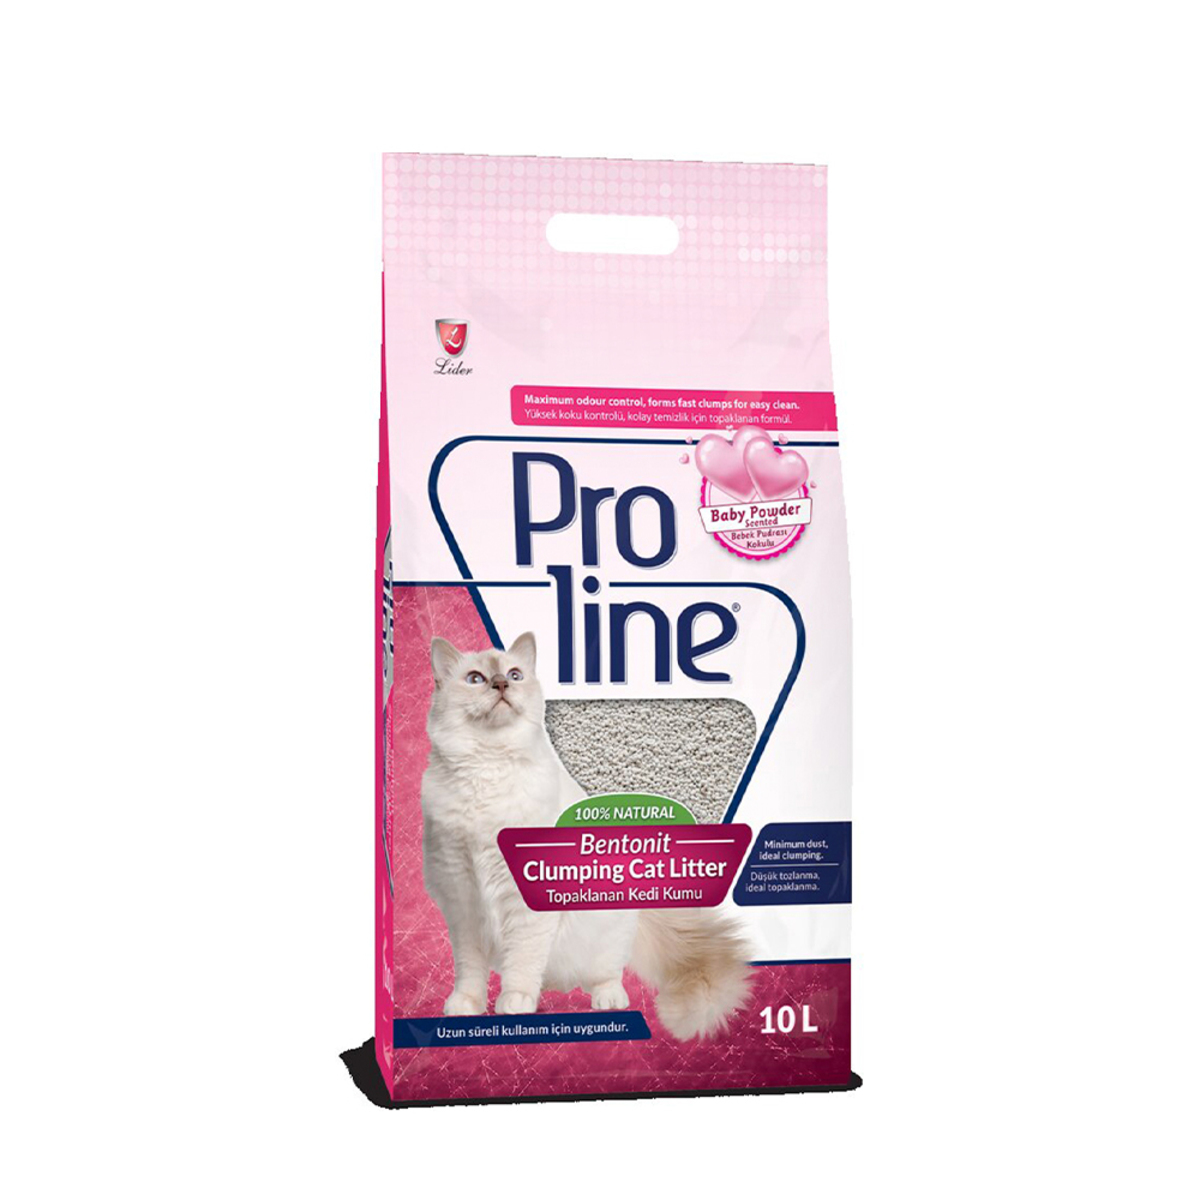 Proline Bentonit Clumping Cat Litter Baby Powder Scented 10 L